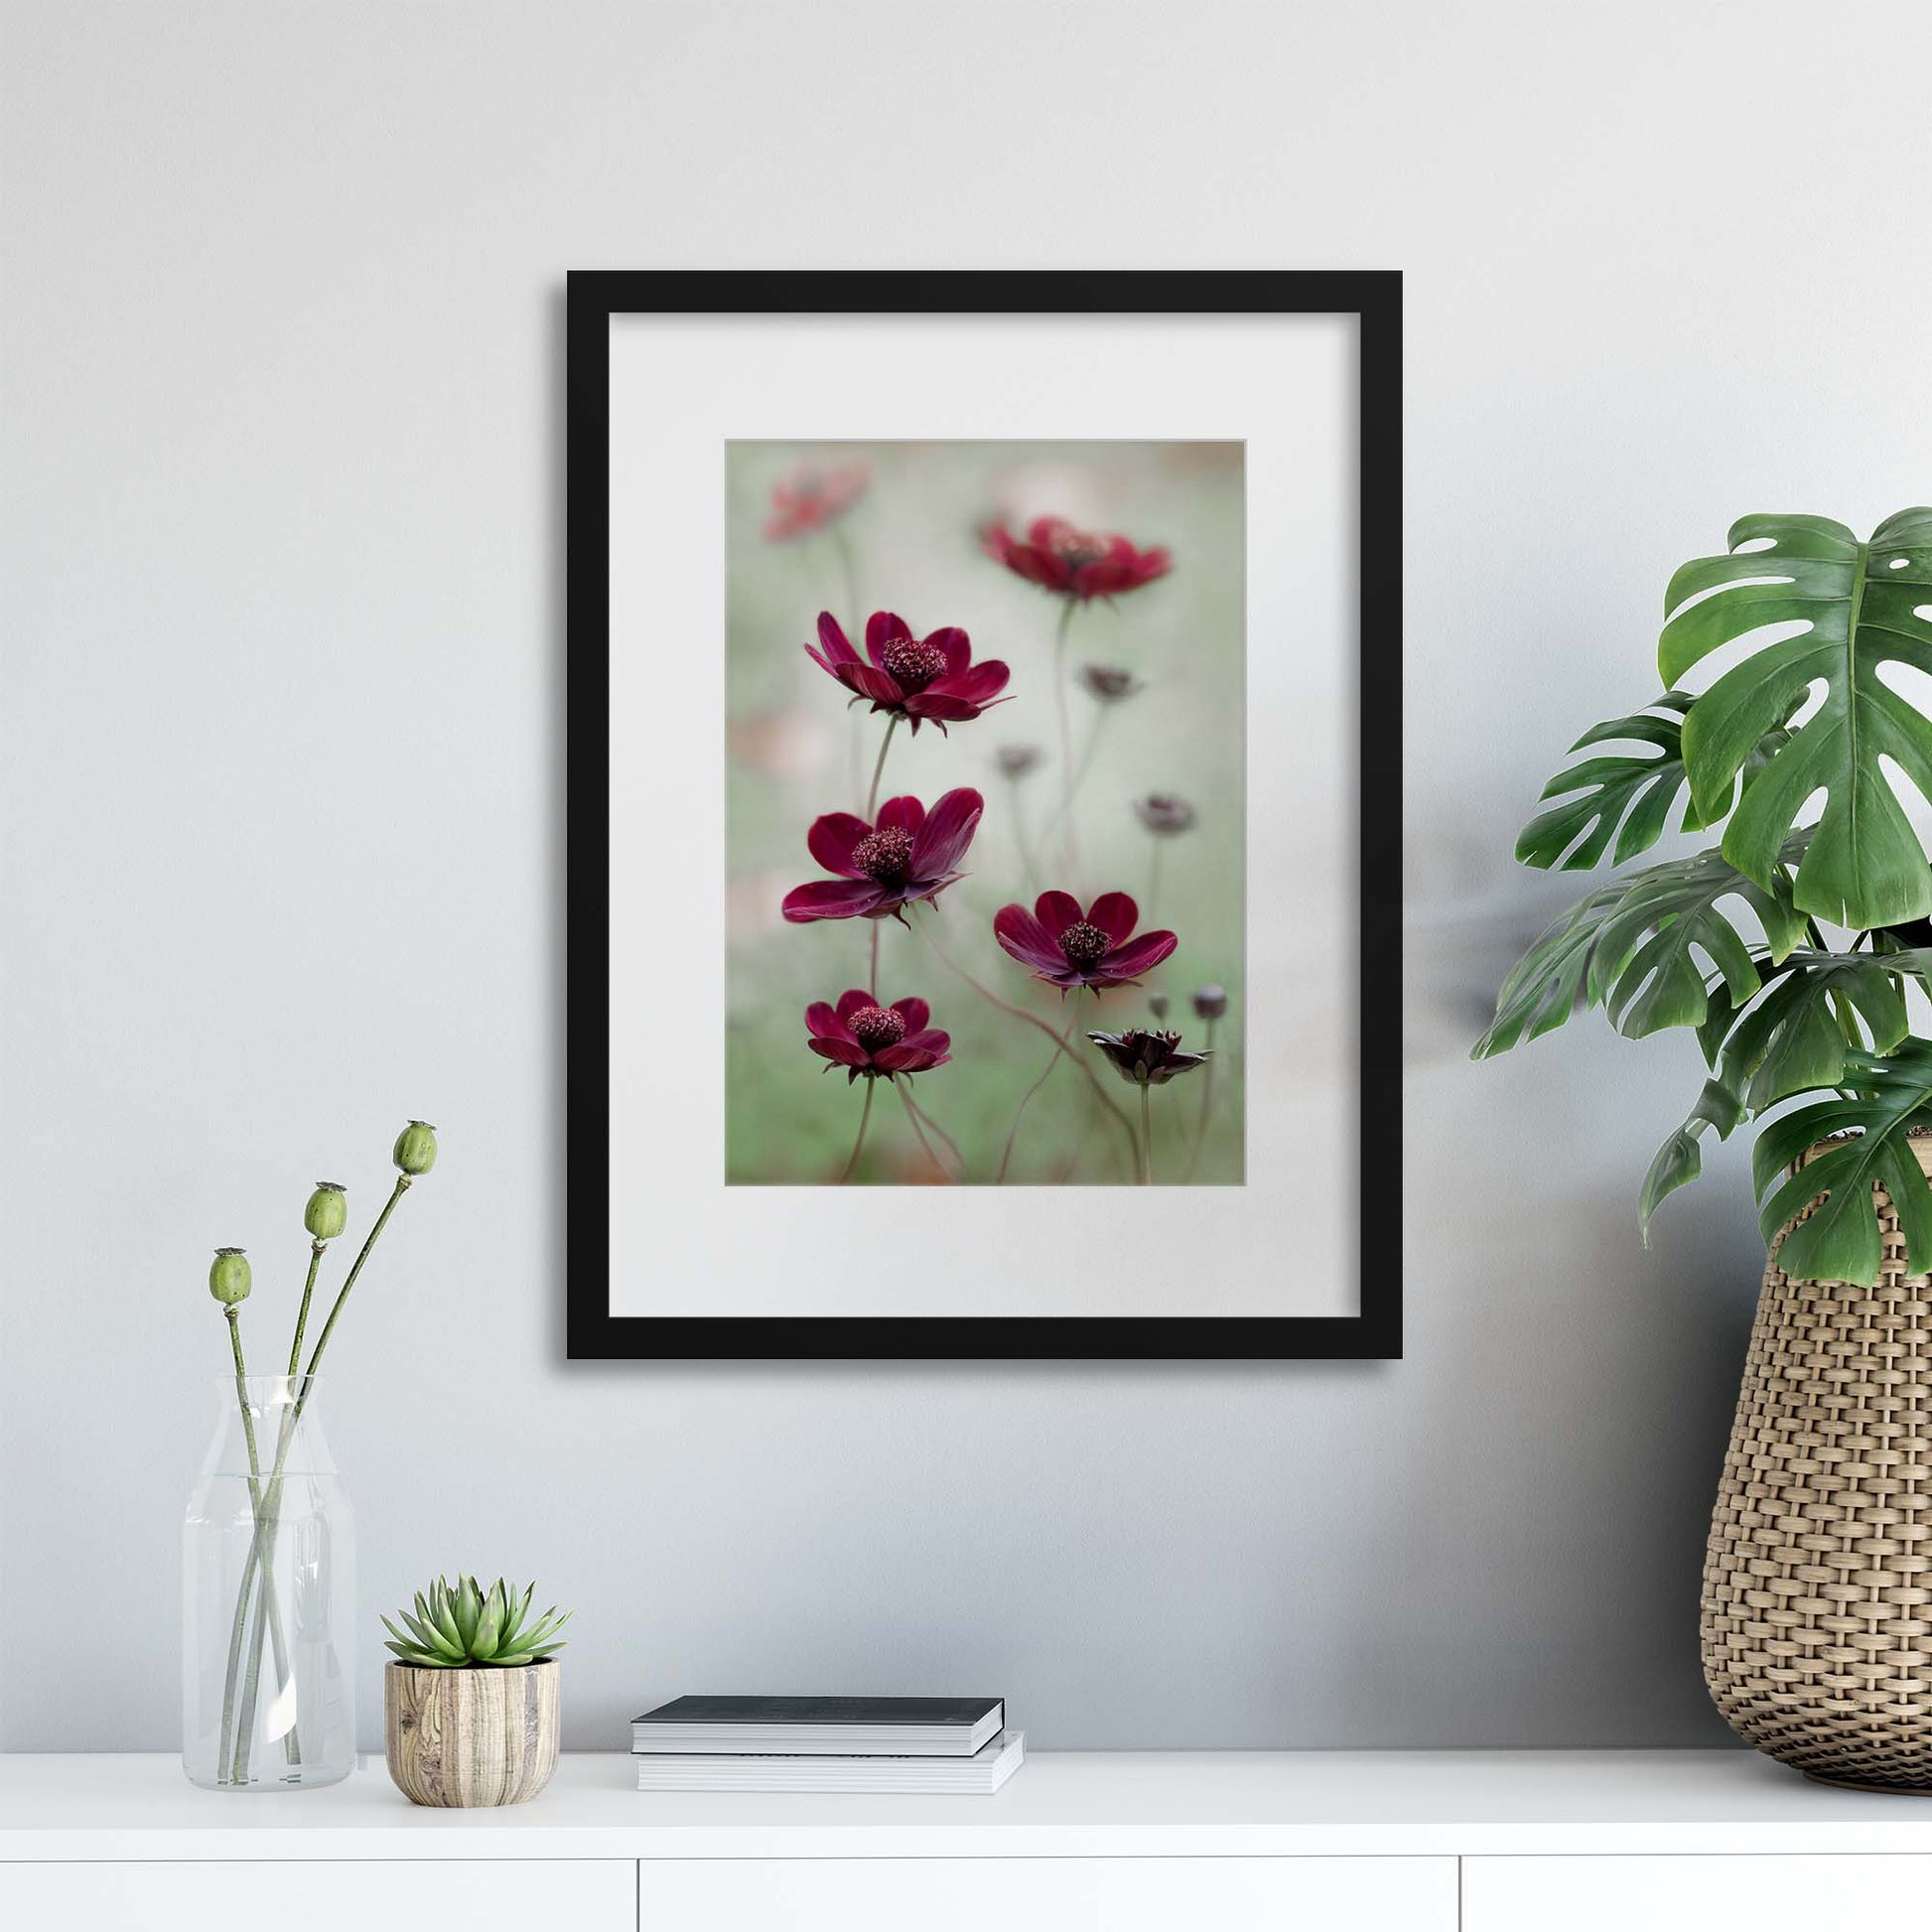 Cosmos Sway by Mandy Disher Framed Print - USTAD HOME